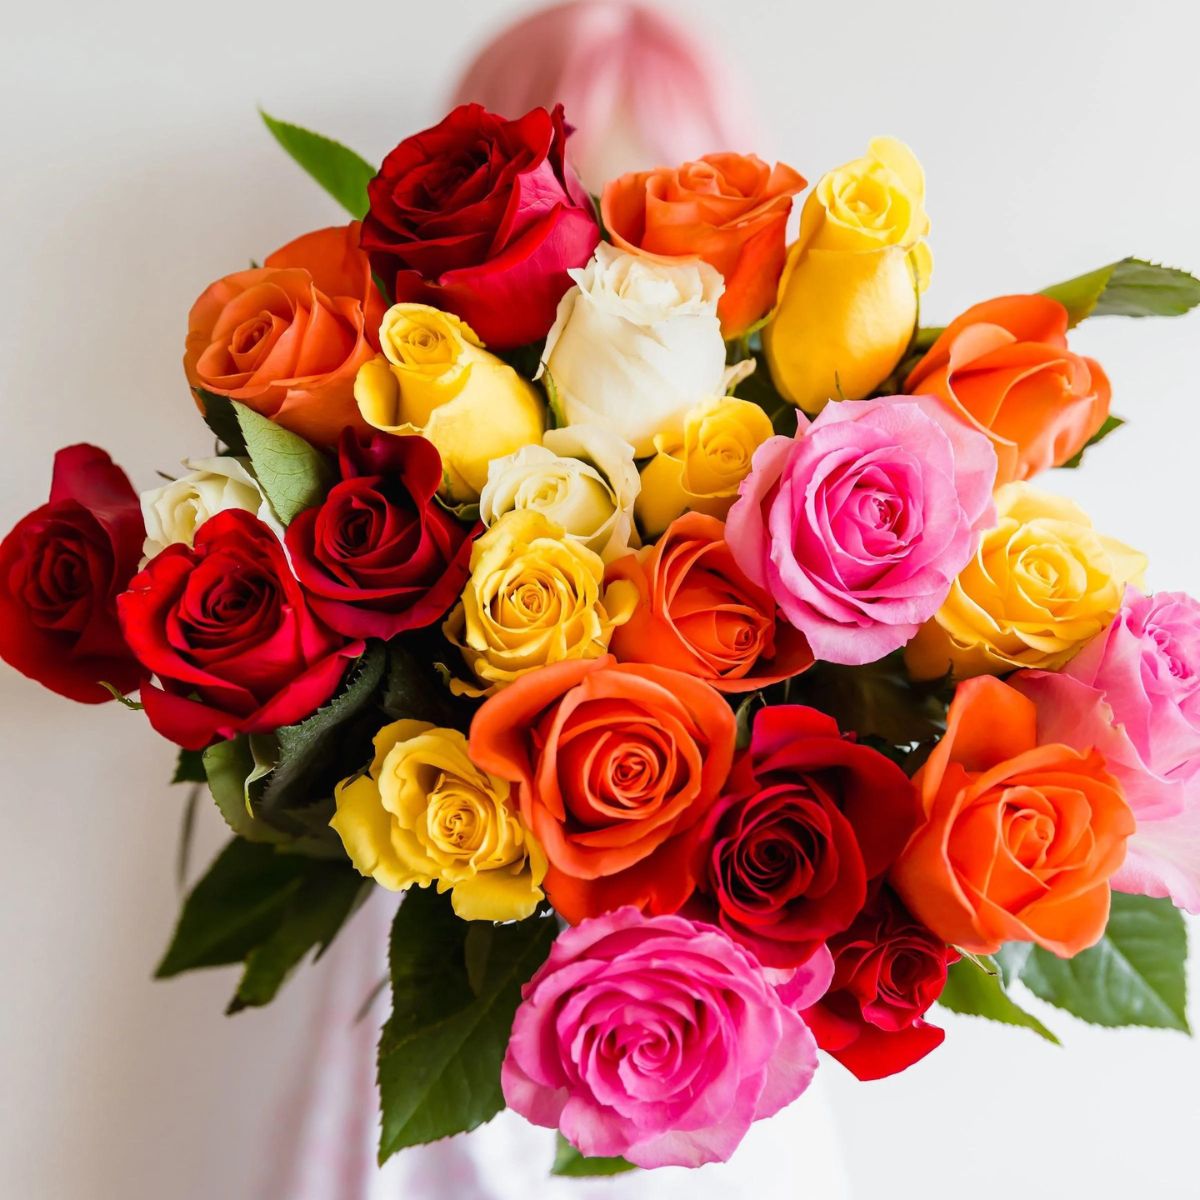 The rose color meaning of eight different roses